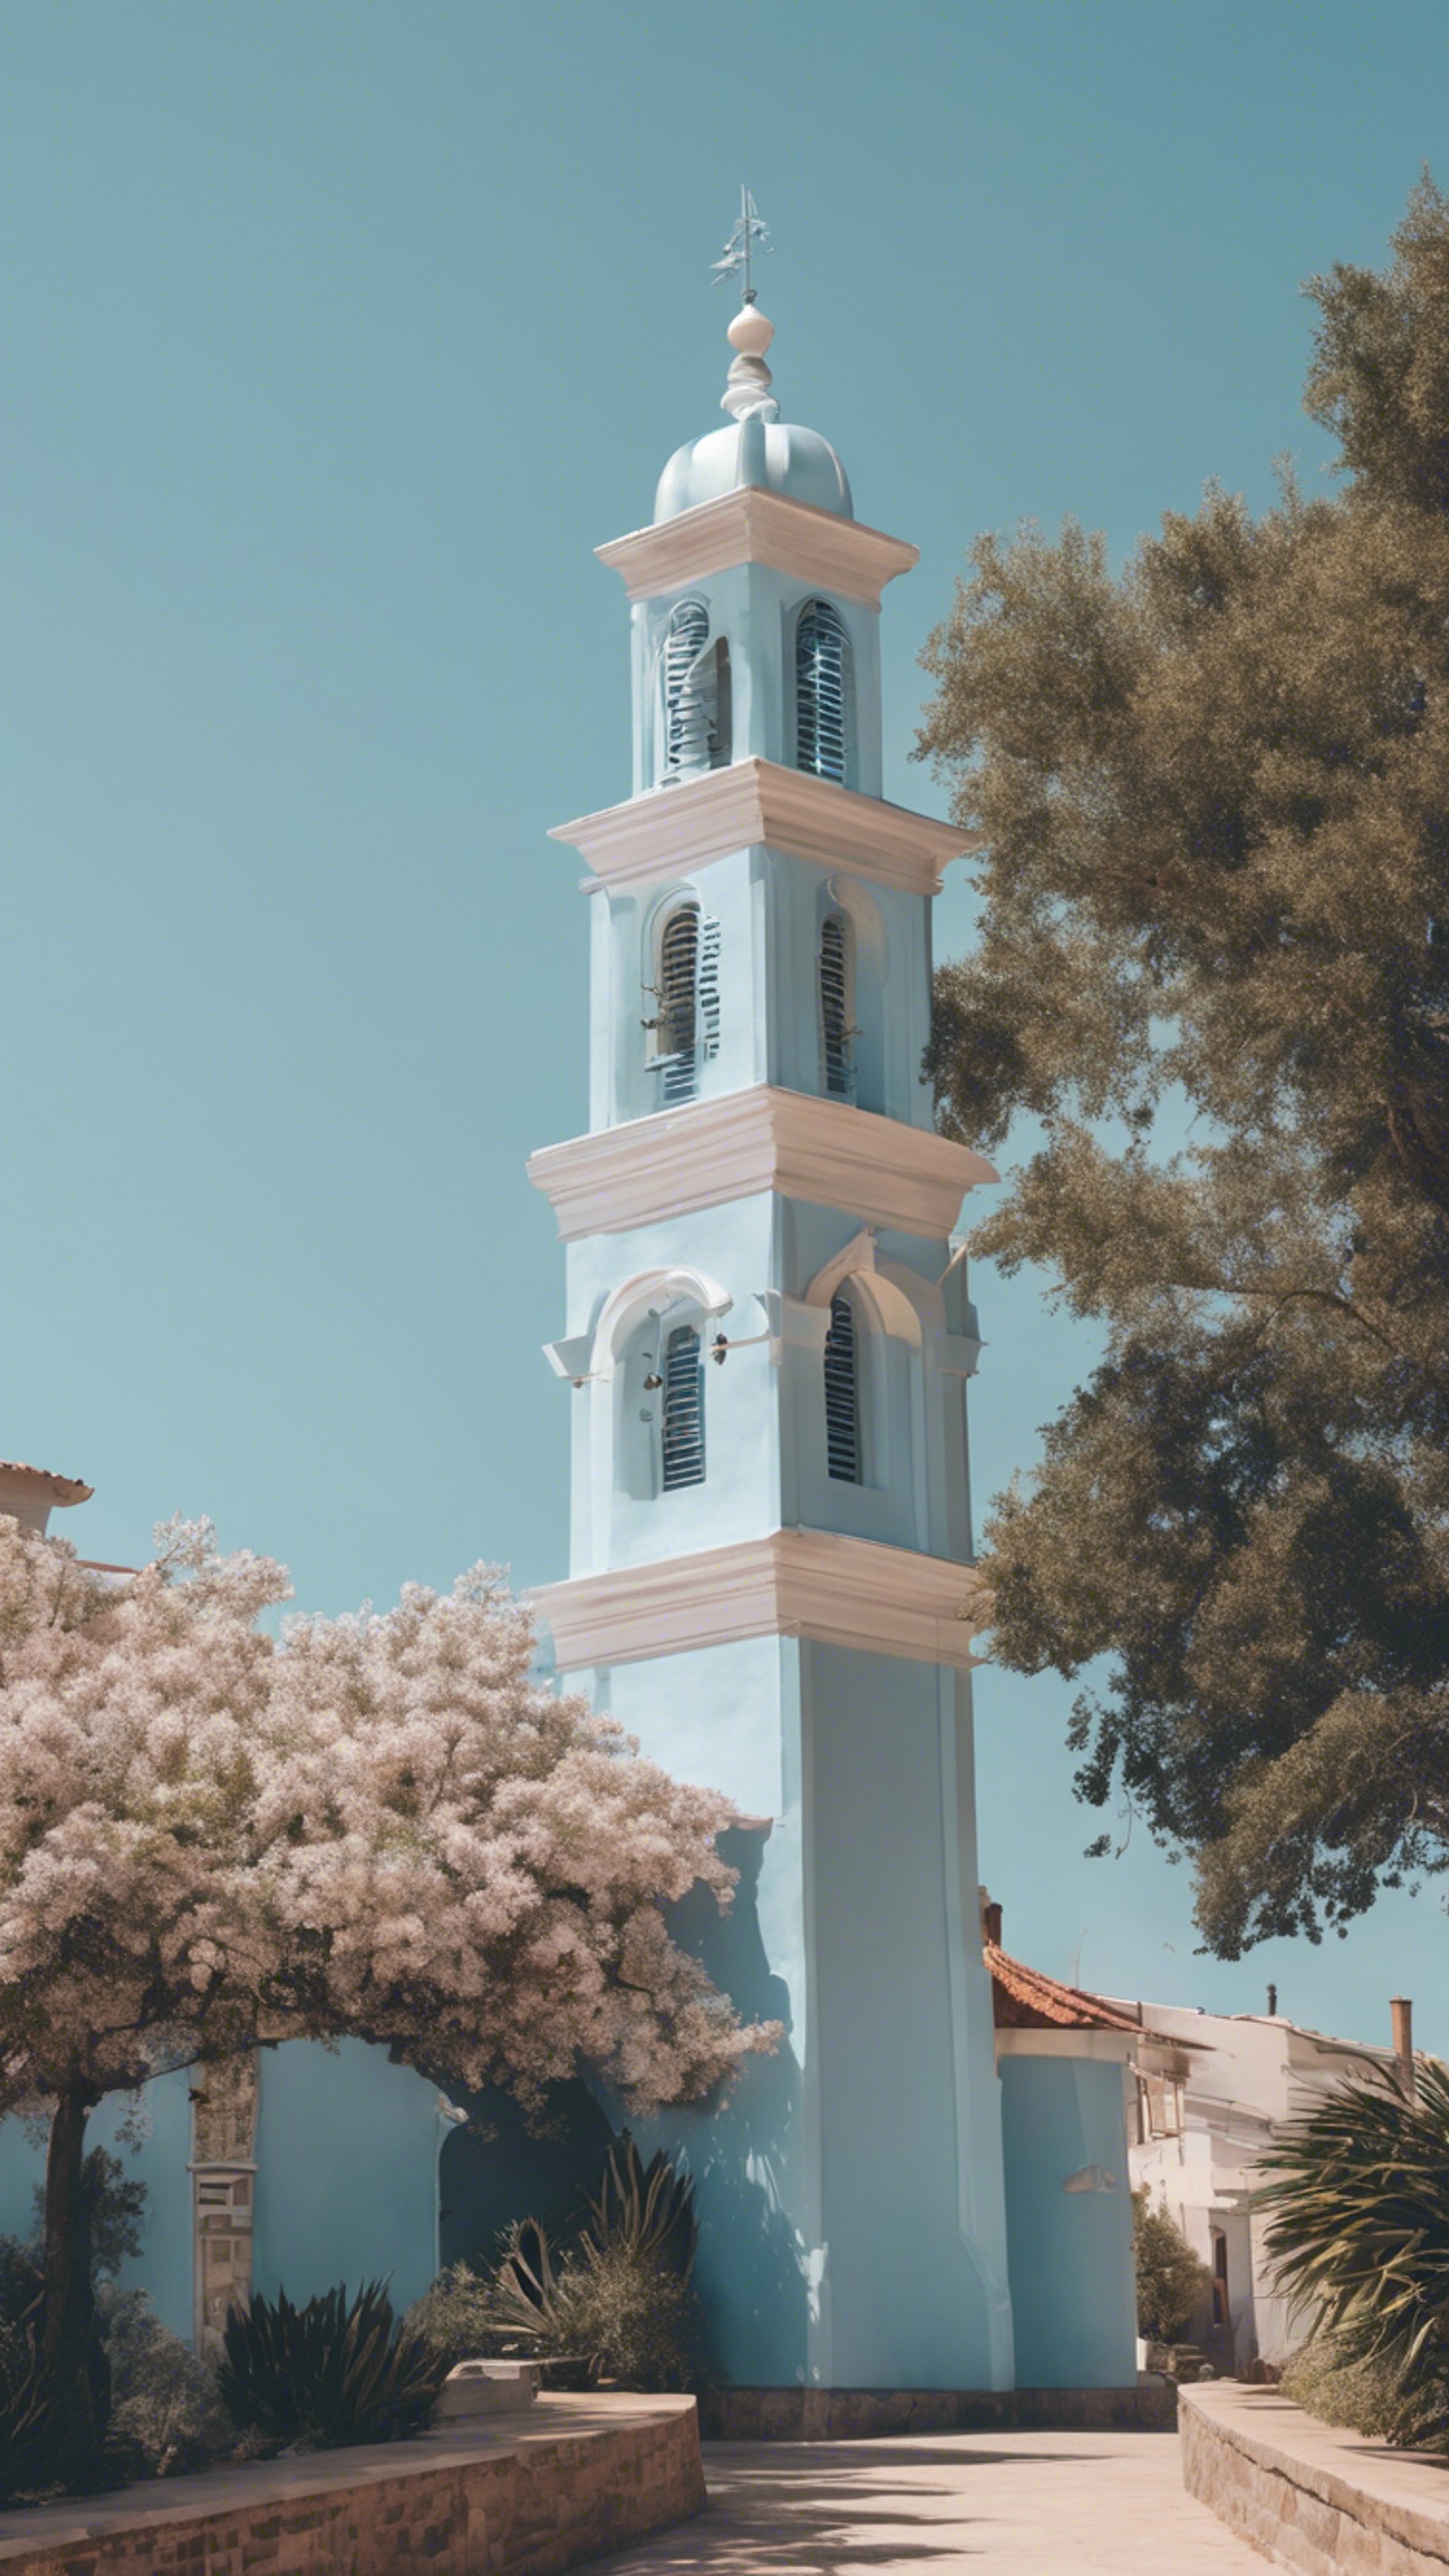 A stately pastel blue bell tower against a clear, sunny sky in a coastal town. 牆紙[a05c52dcc3054b35b6be]